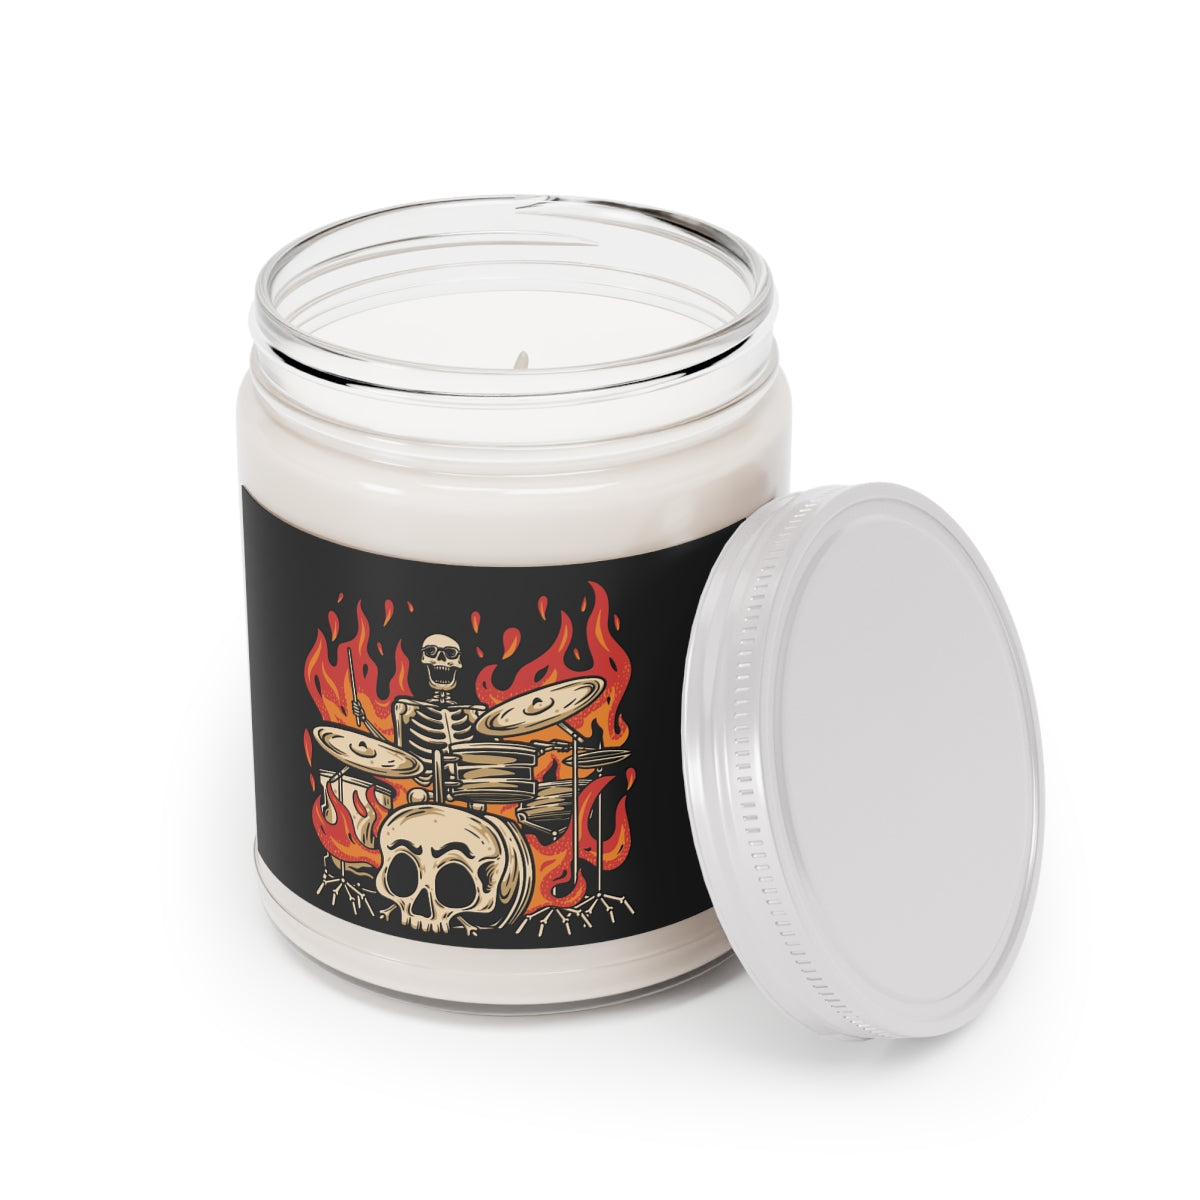 Drummer Fire Scented Candle, Skull Classic Rock Metal Band Handmade Aromatherapy Gothic Skeleton Soy Wax Men Gift Present Starcove Fashion